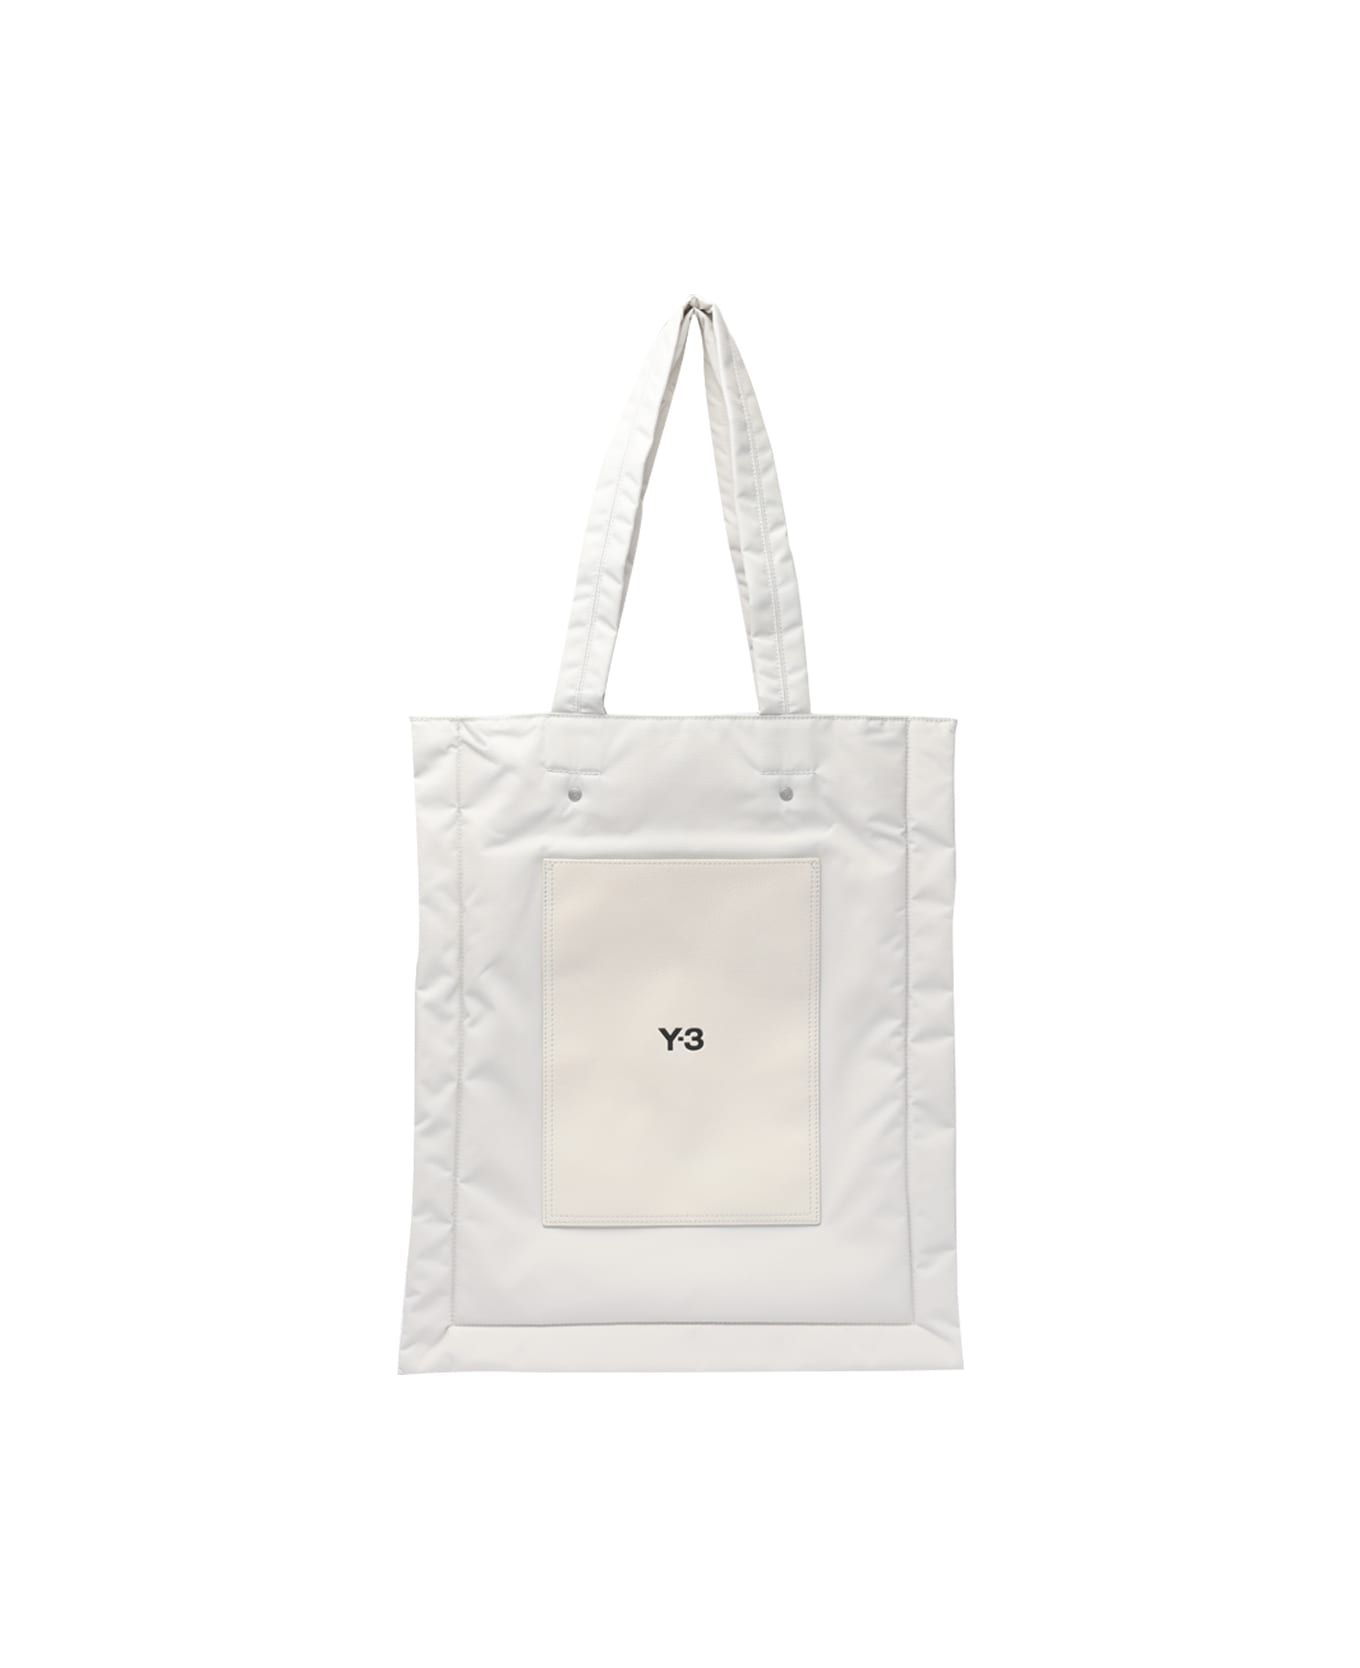 Y-3 Lux Tote Bag - White トートバッグ